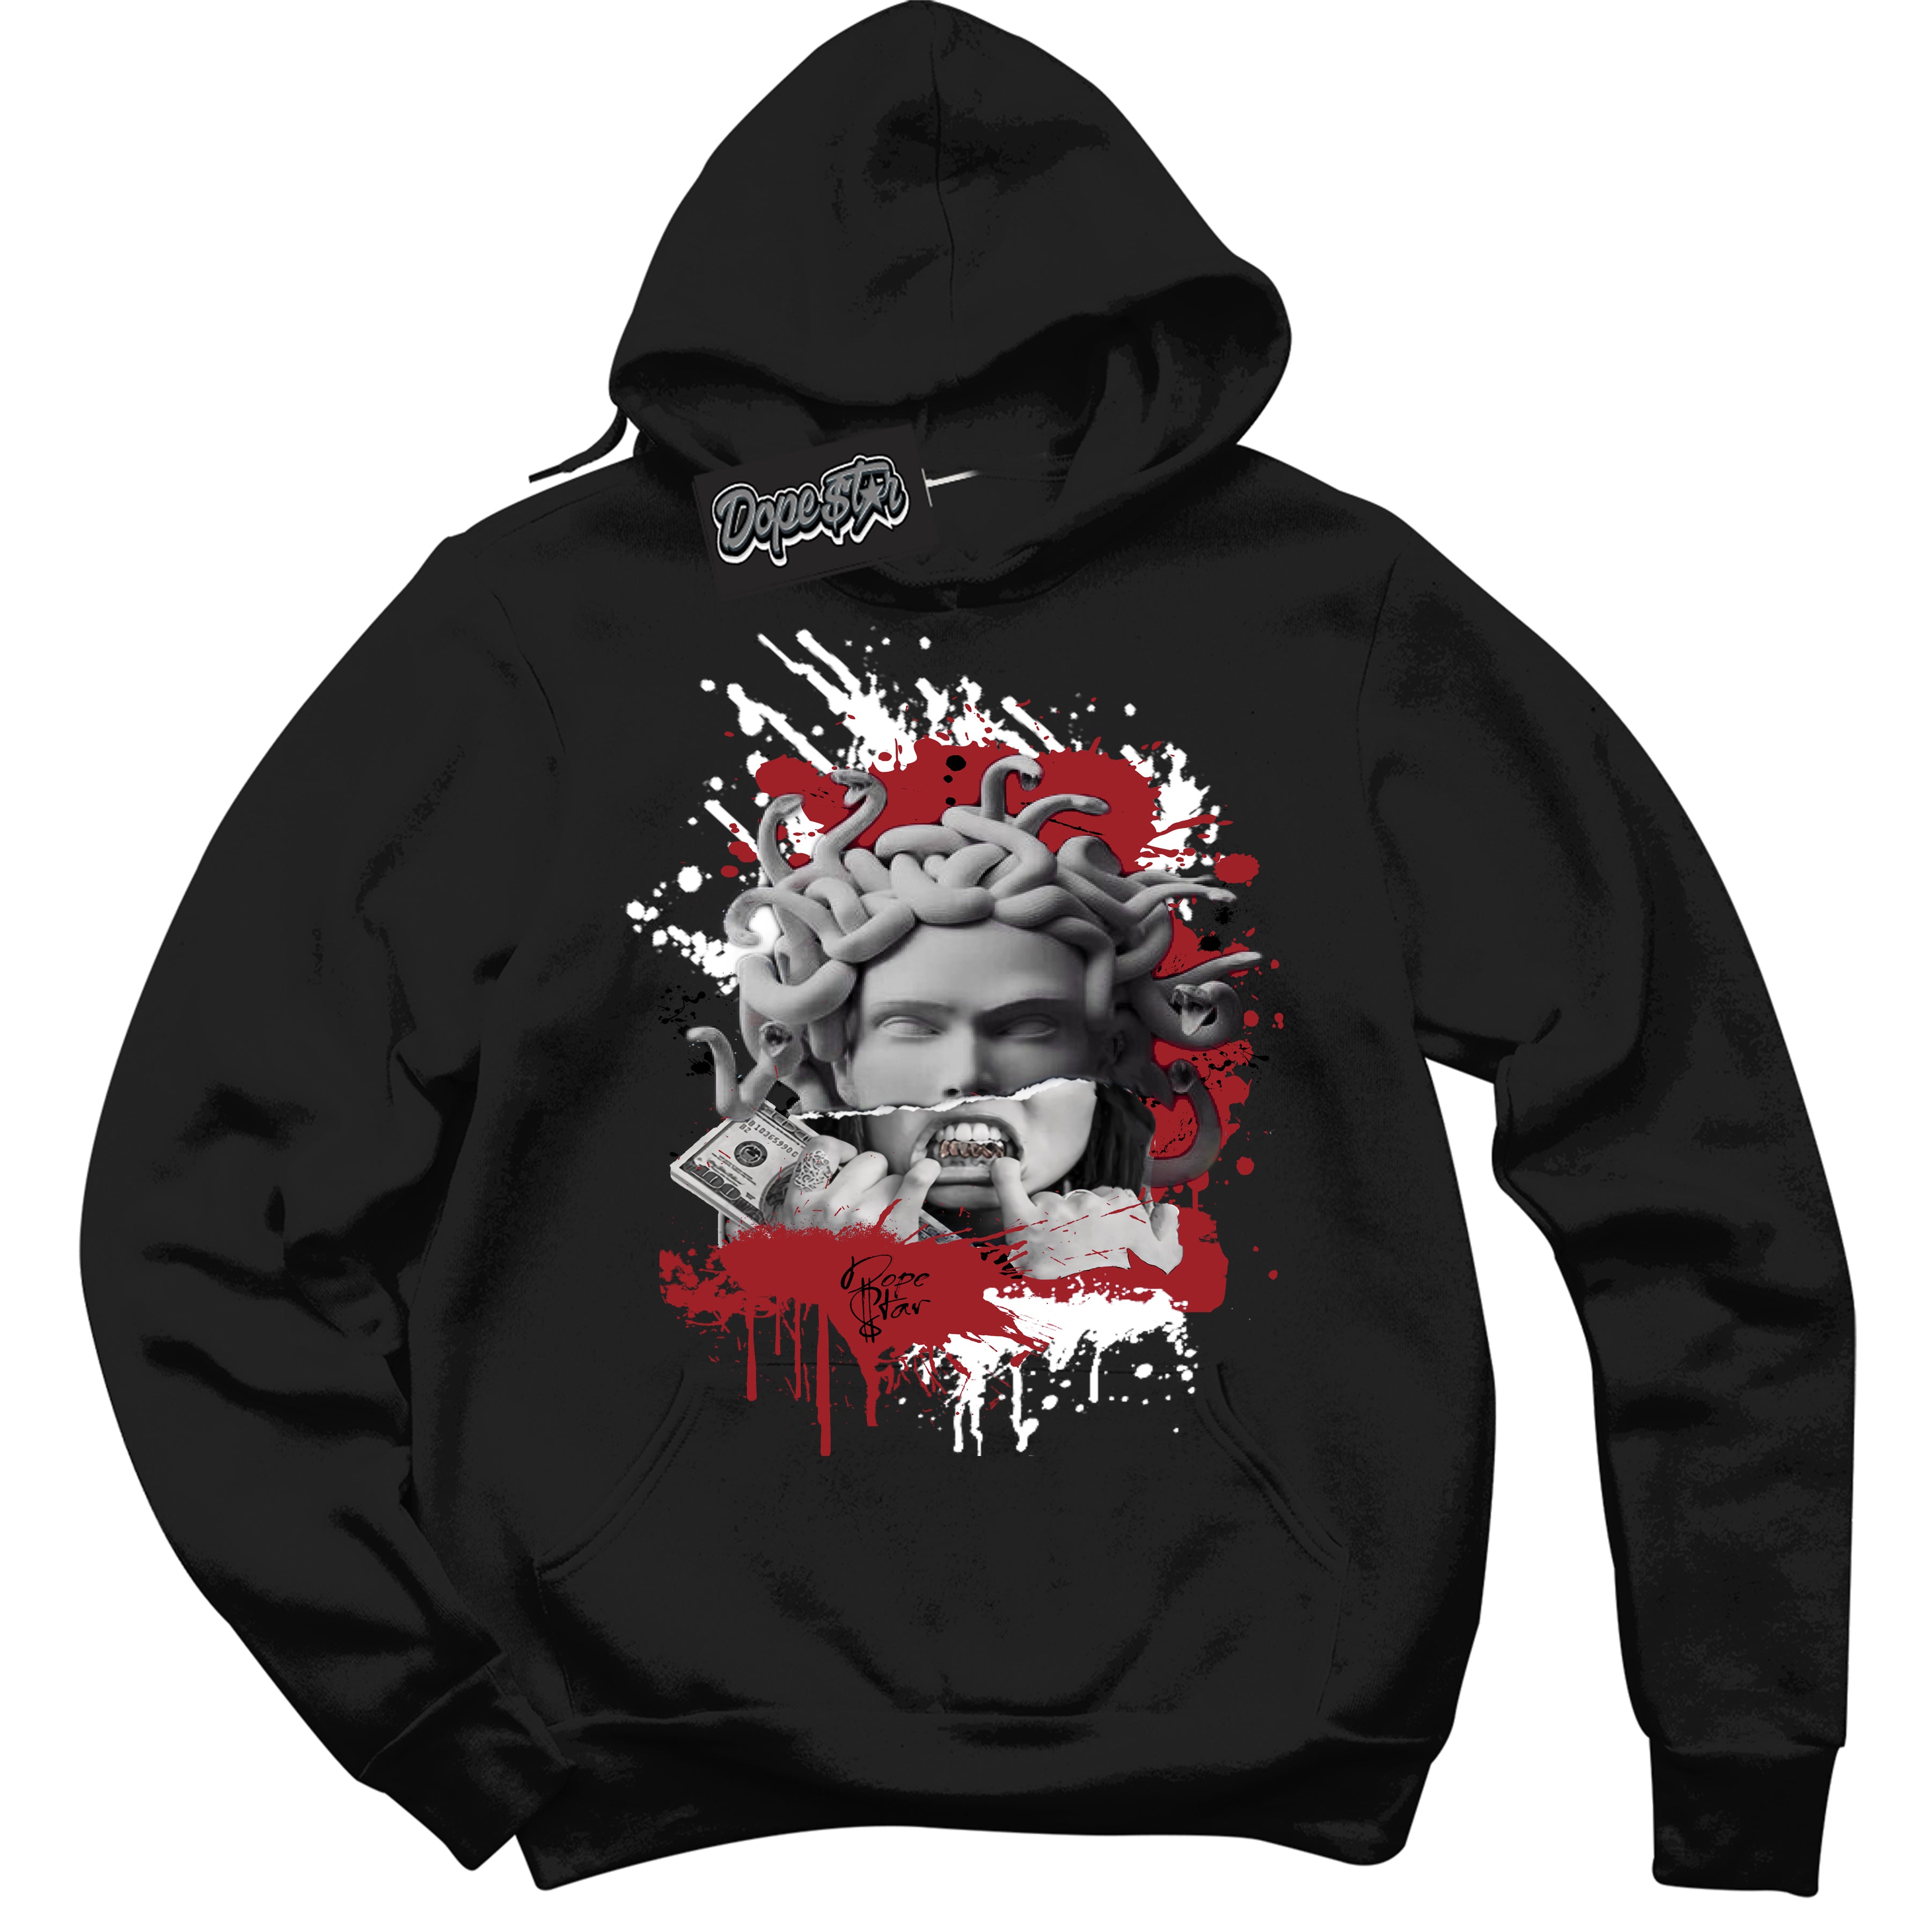 Cool Black Hoodie With “ Medusa “ Design That Perfectly Matches Lost And Found 1s Sneakers